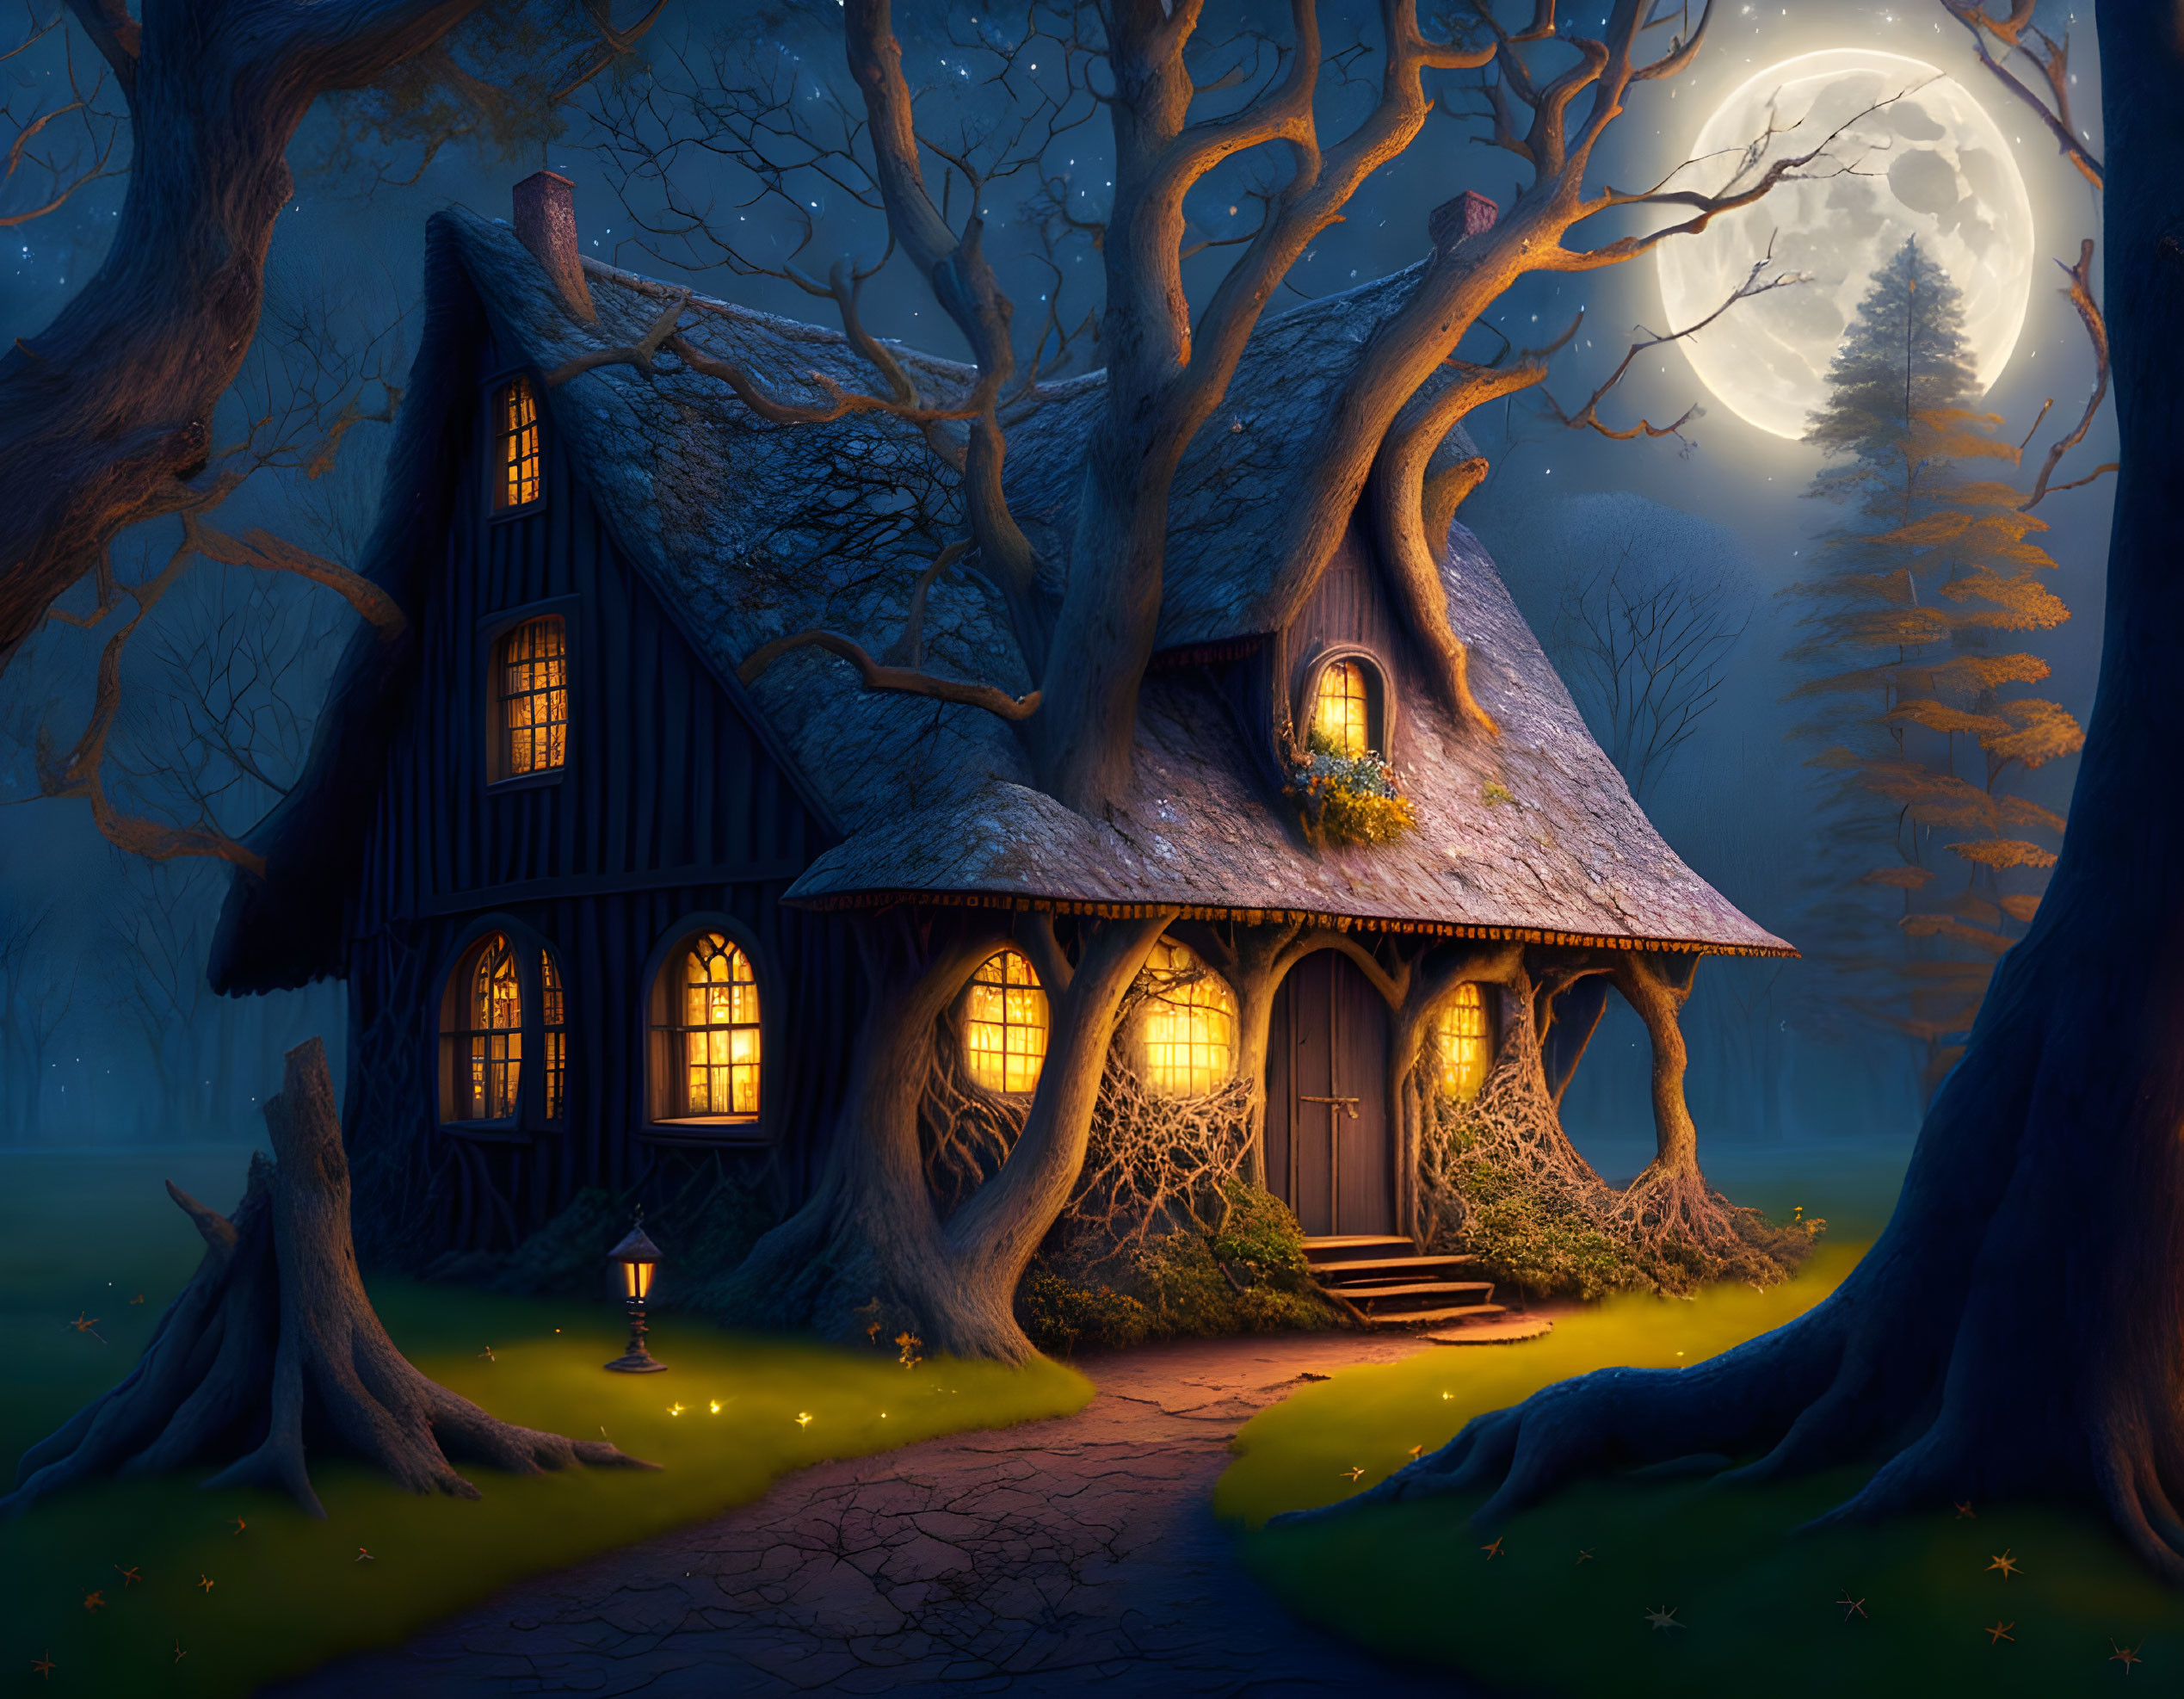  An old witch's house